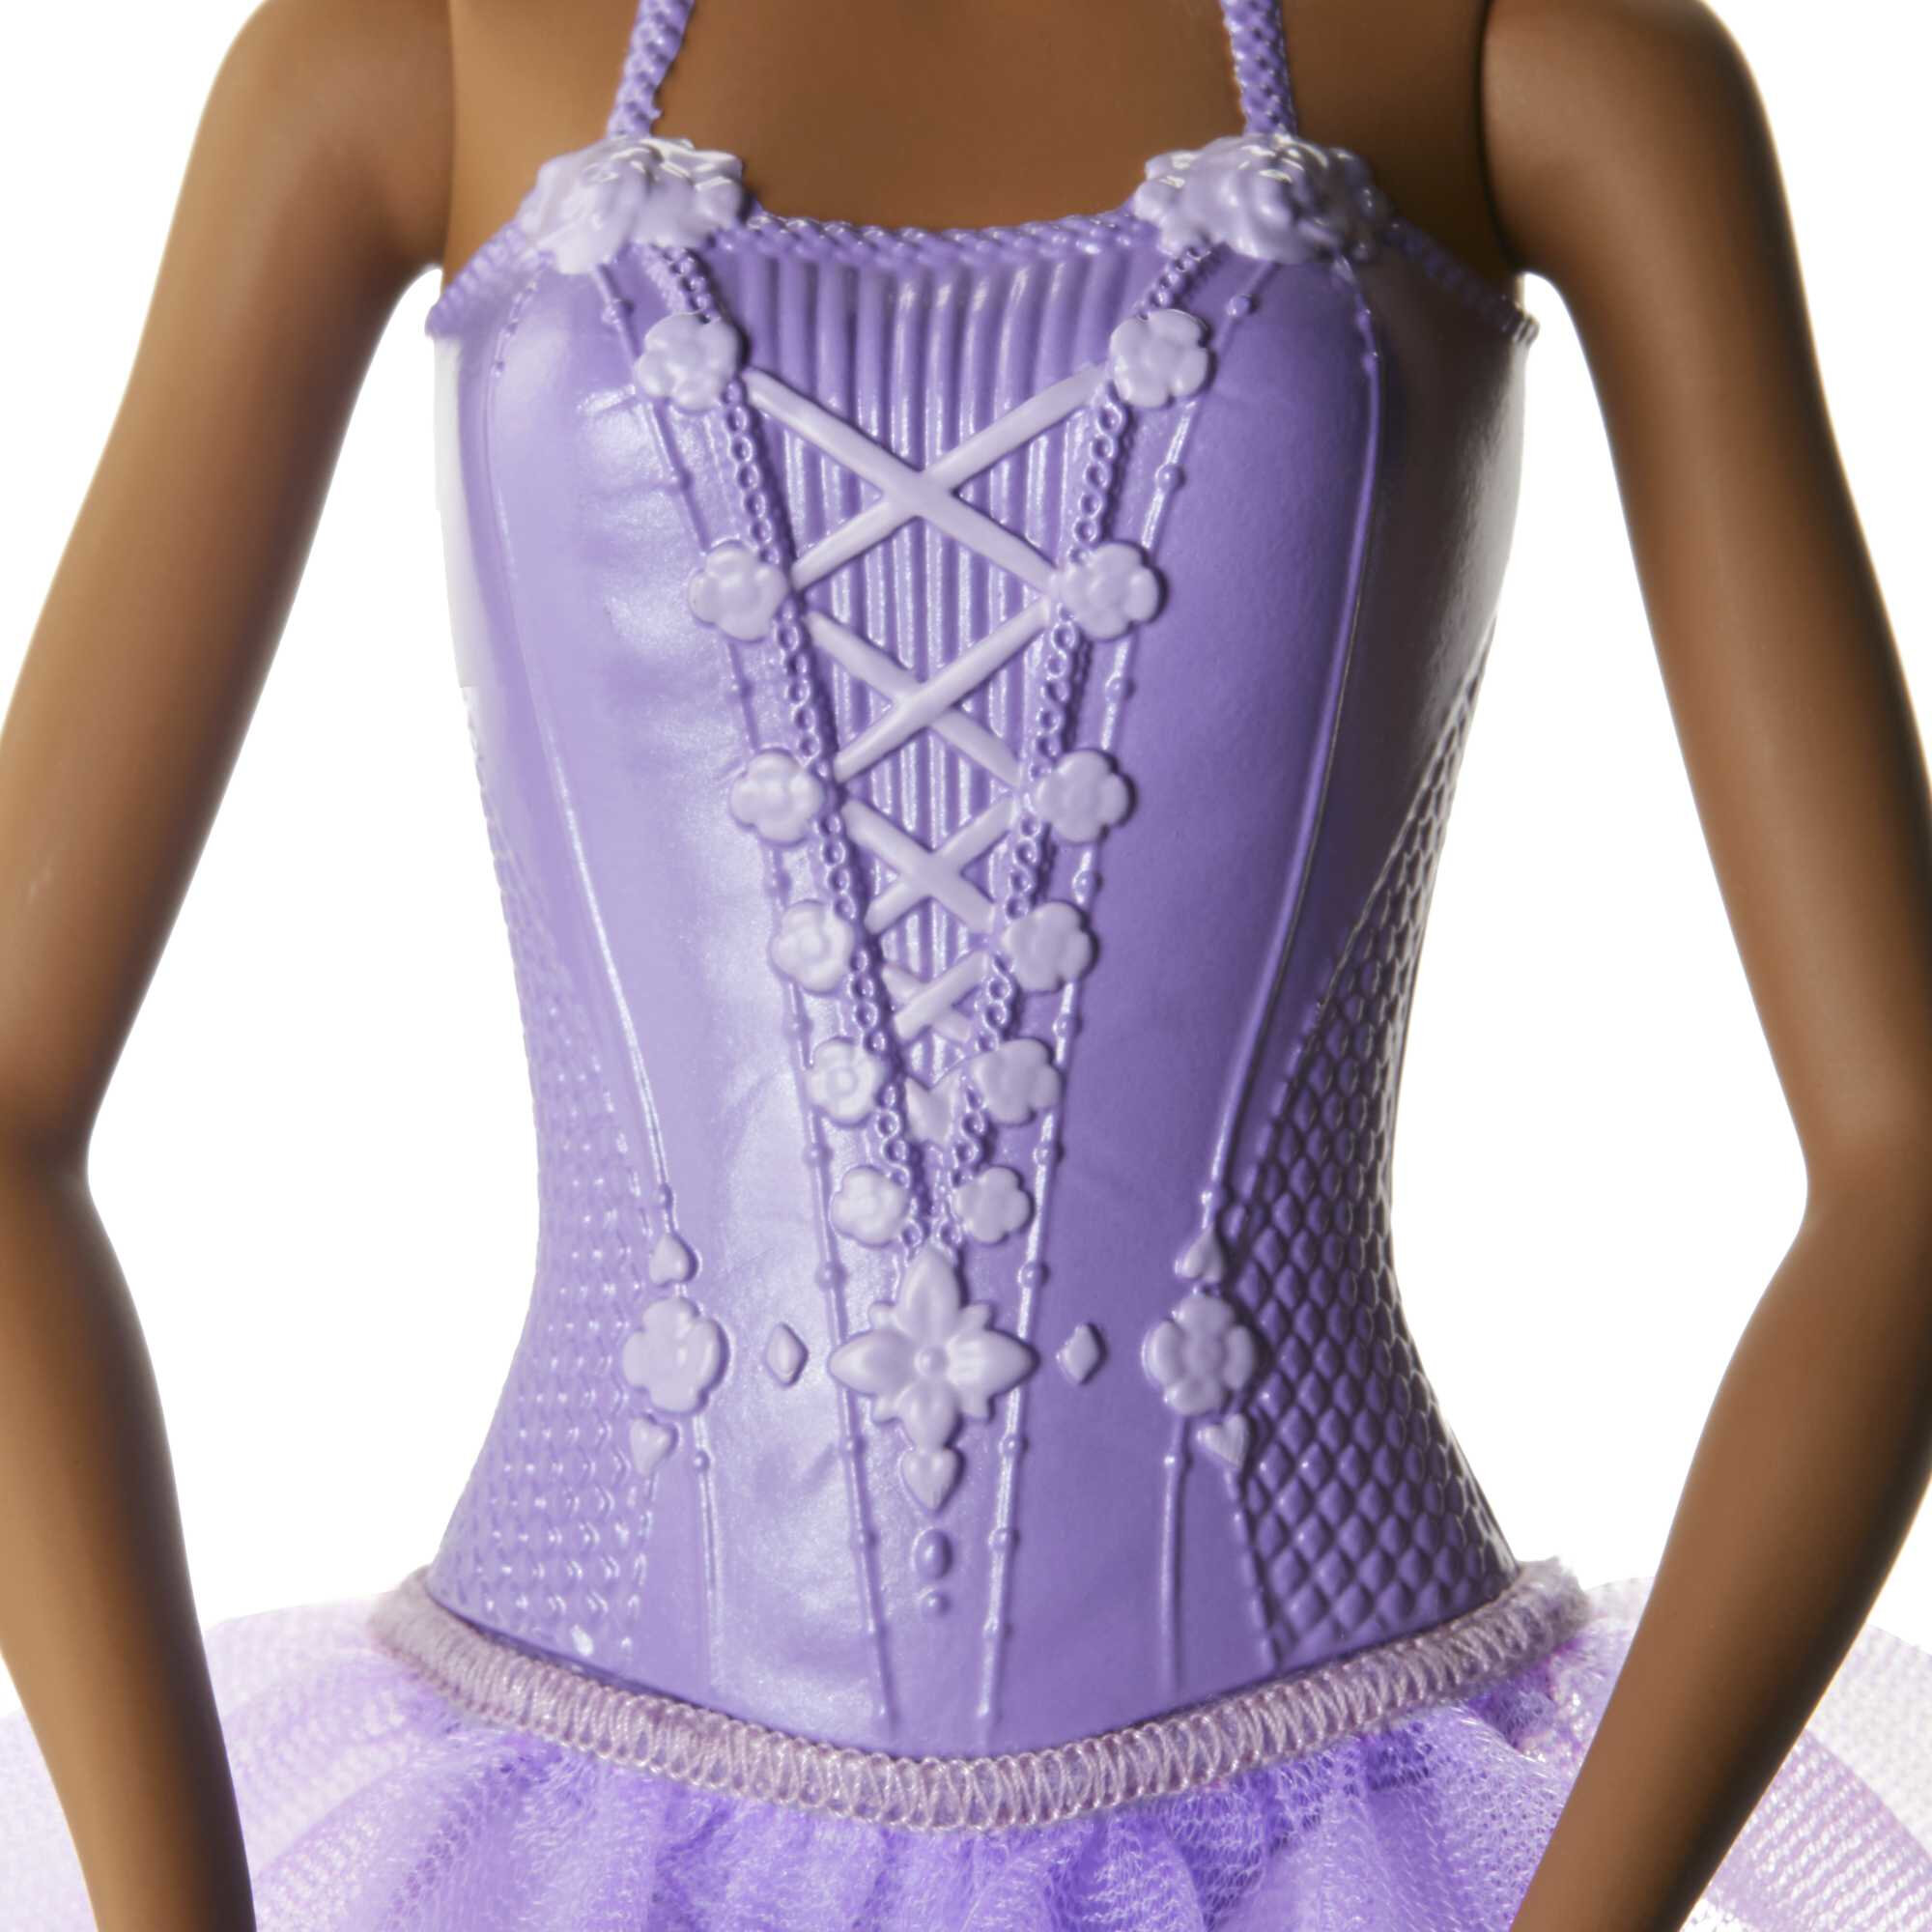 Barbie Ballerina Doll in Purple Tutu with Black Hair, Brown Eyes, Ballet Arms & Sculpted Toe Shoes - image 3 of 6